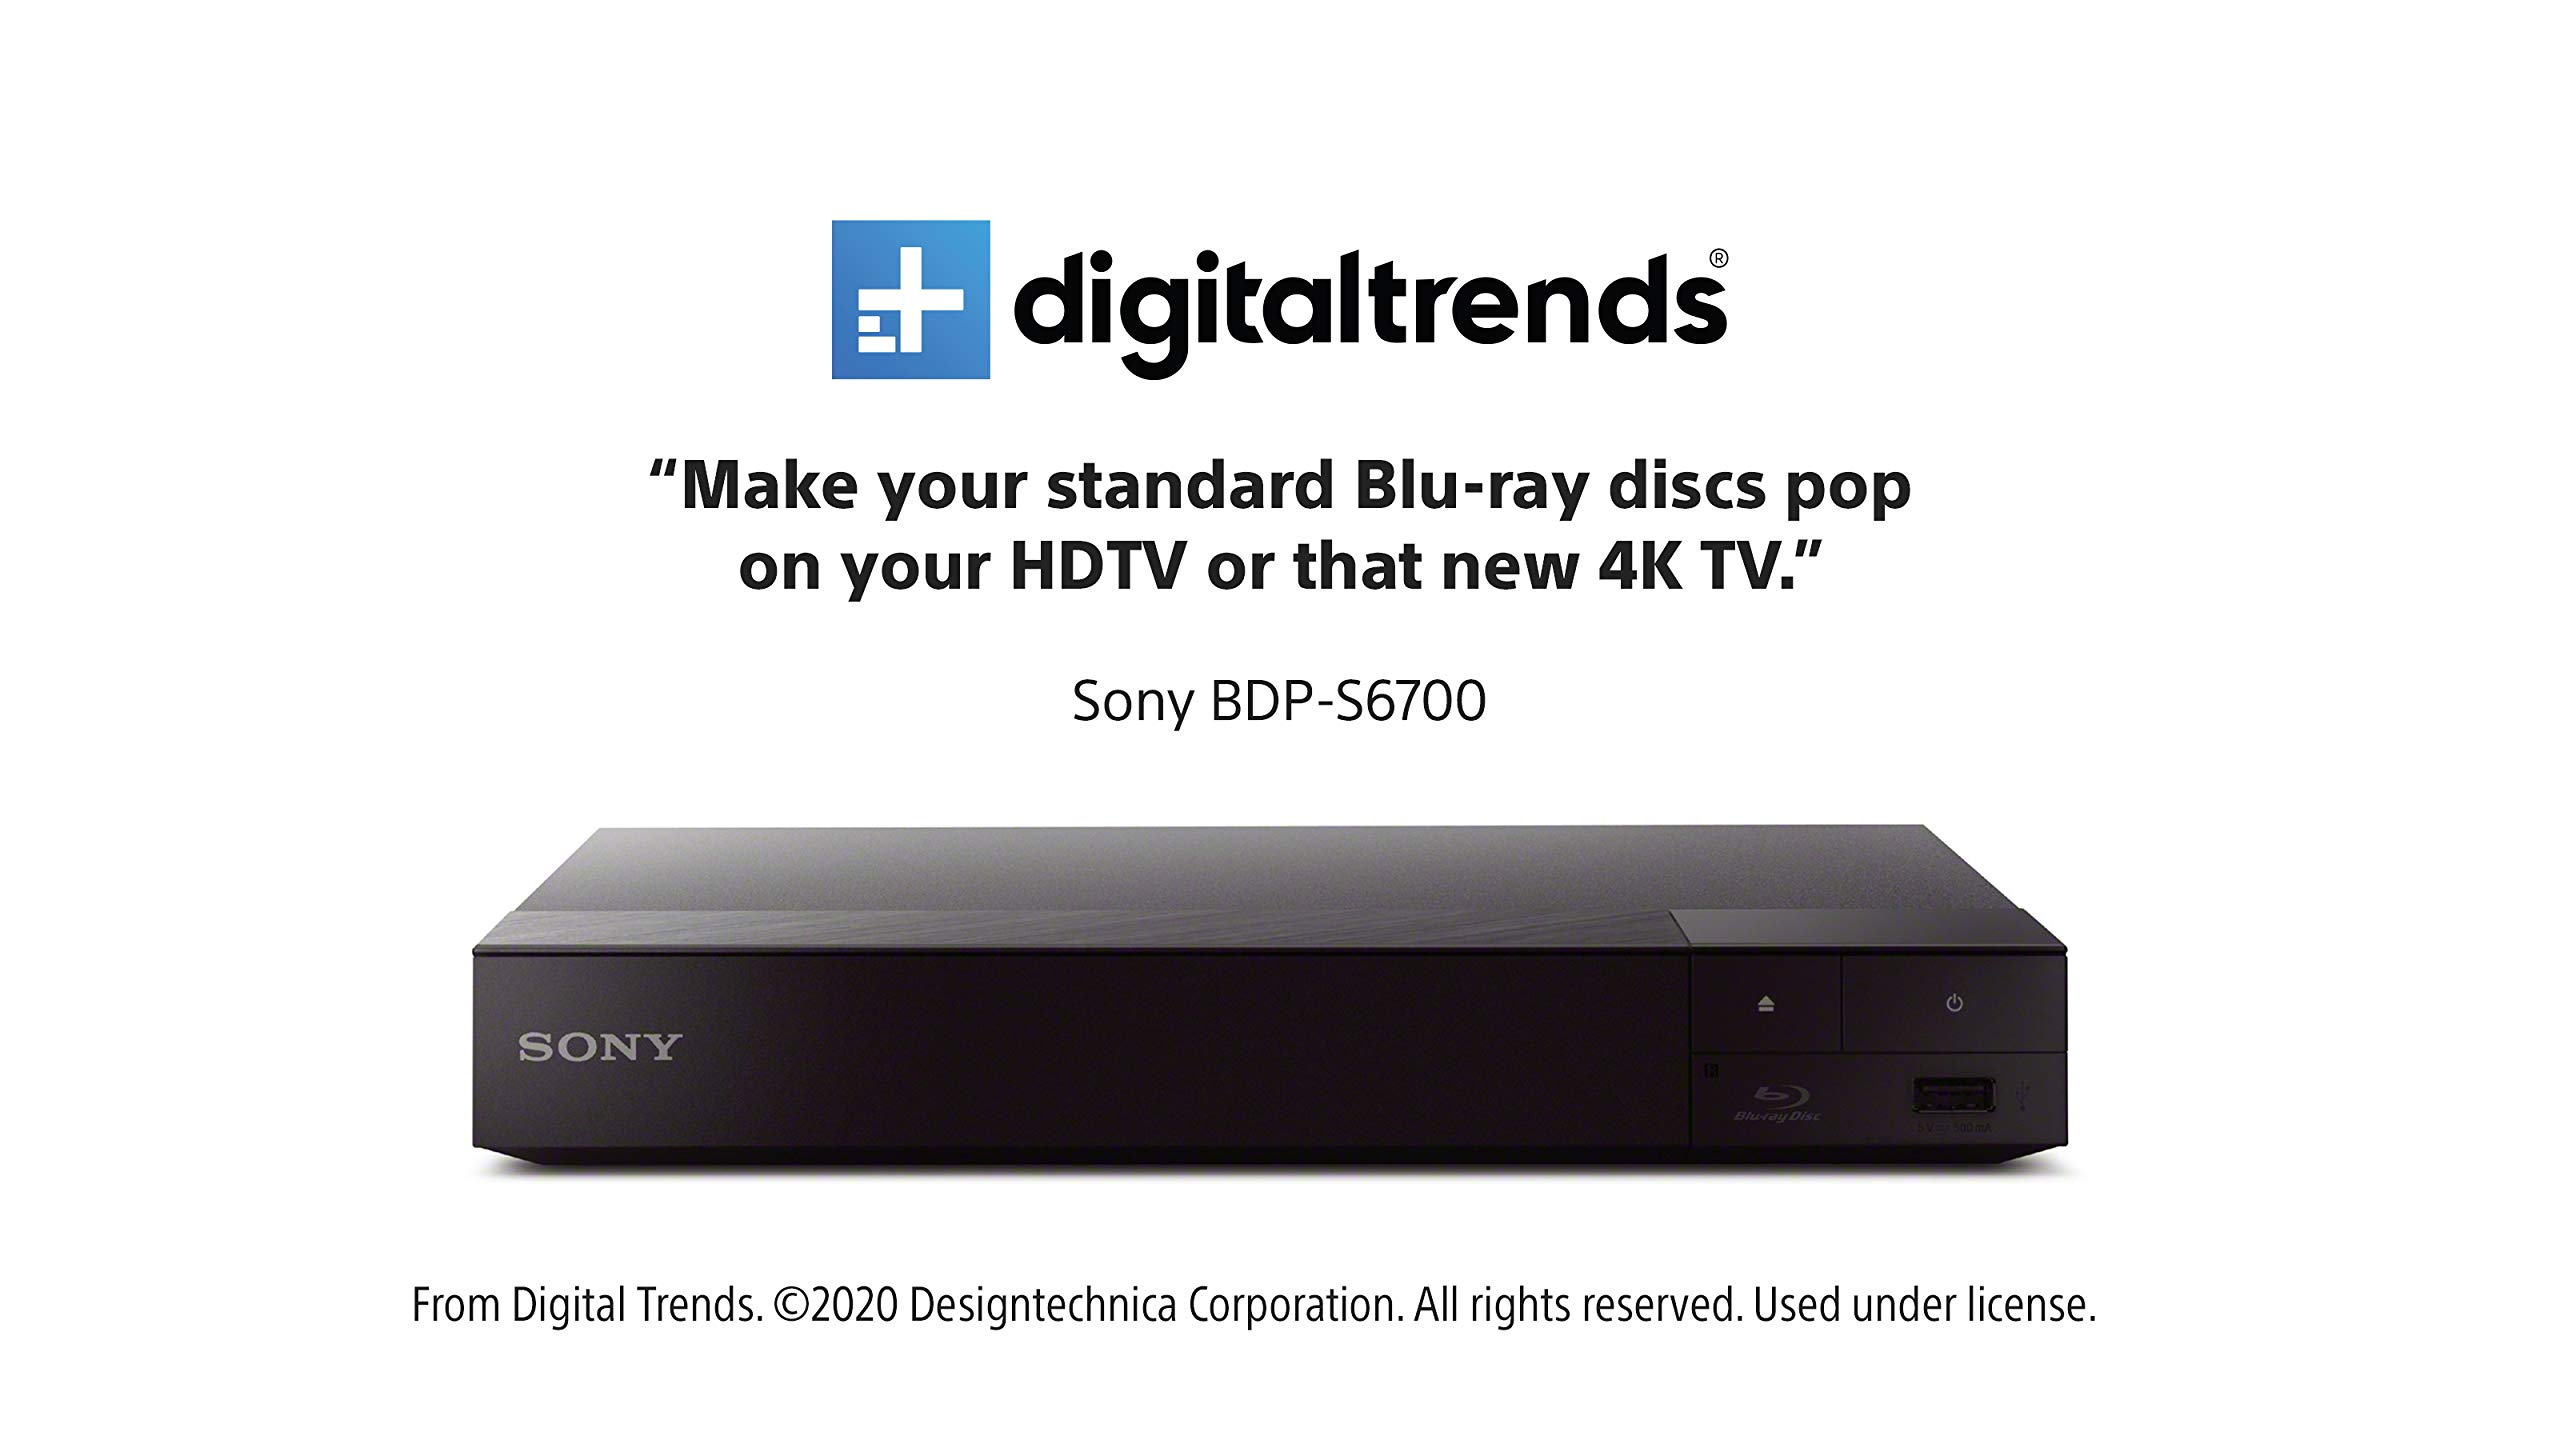 Sony BDP-S6700 4K Upscaling 3D Home Theater Streaming Blu-Ray DVD Player with Wi-Fi, Dolby Digital TrueHD/DTS, and upscaling